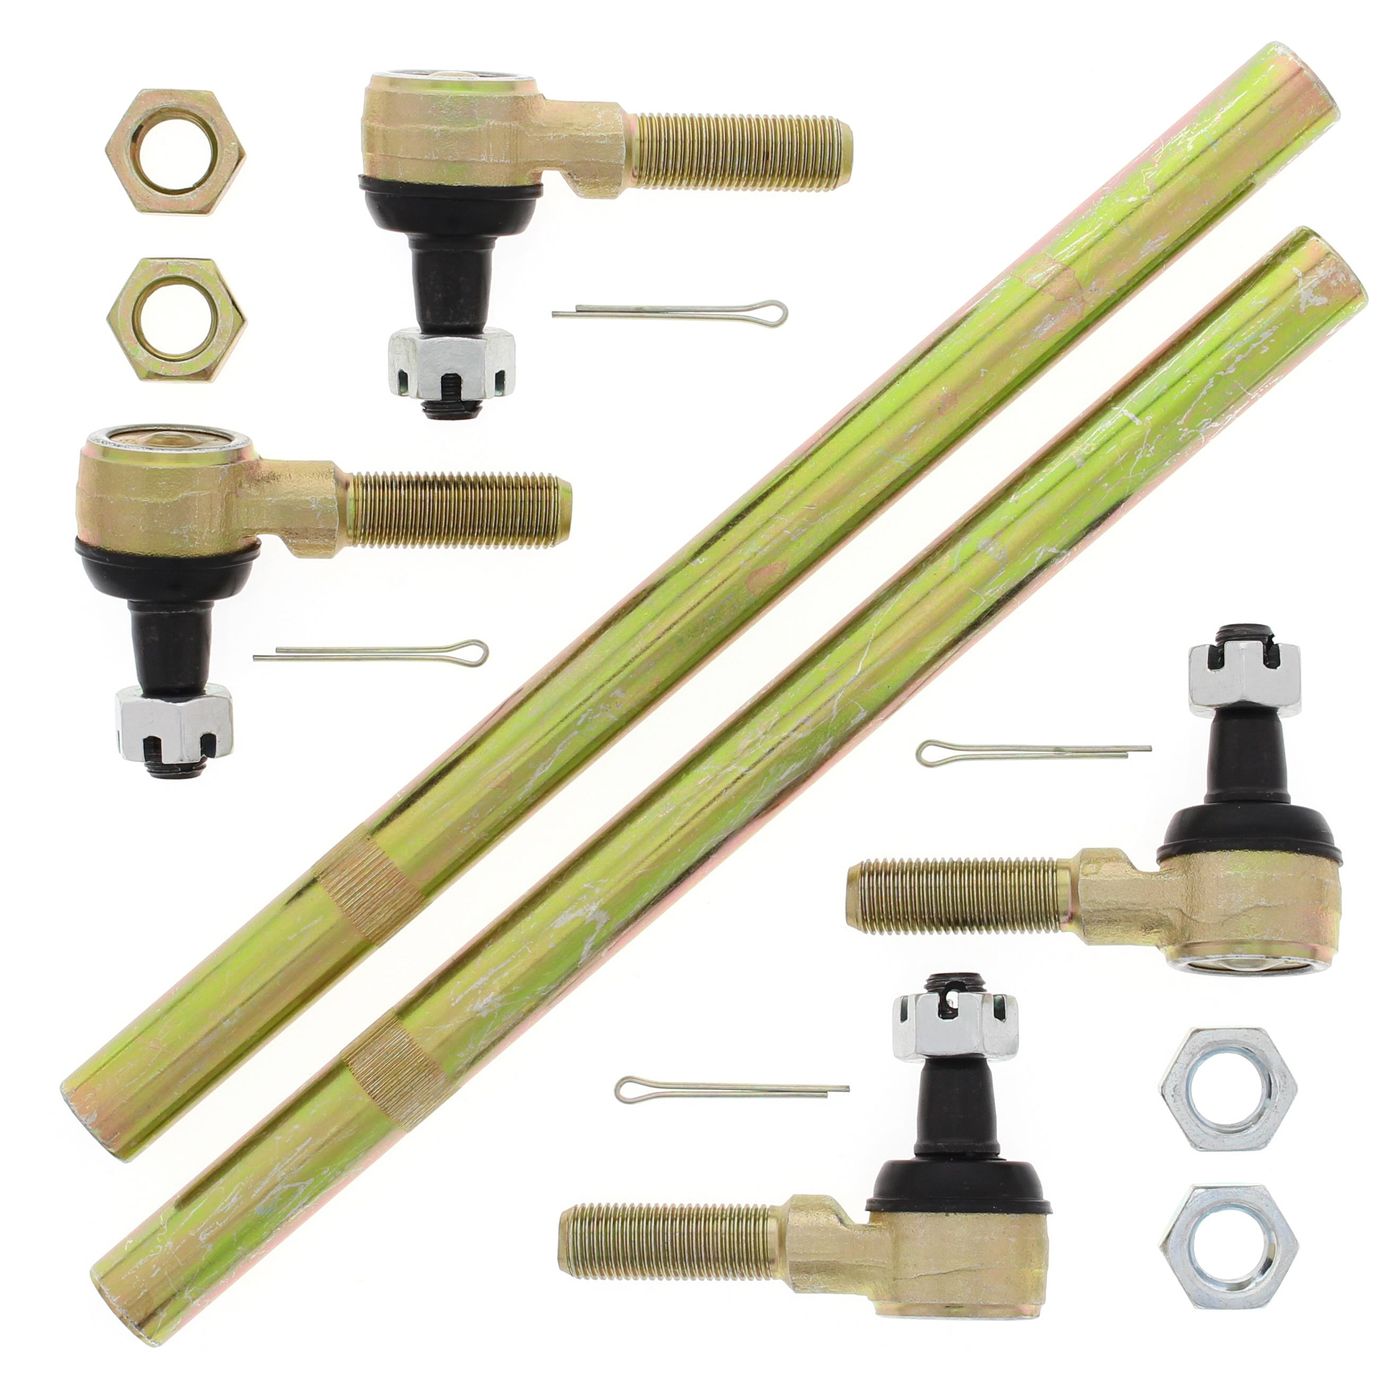 Wrp Tie Rod Kits - WRP521003 image